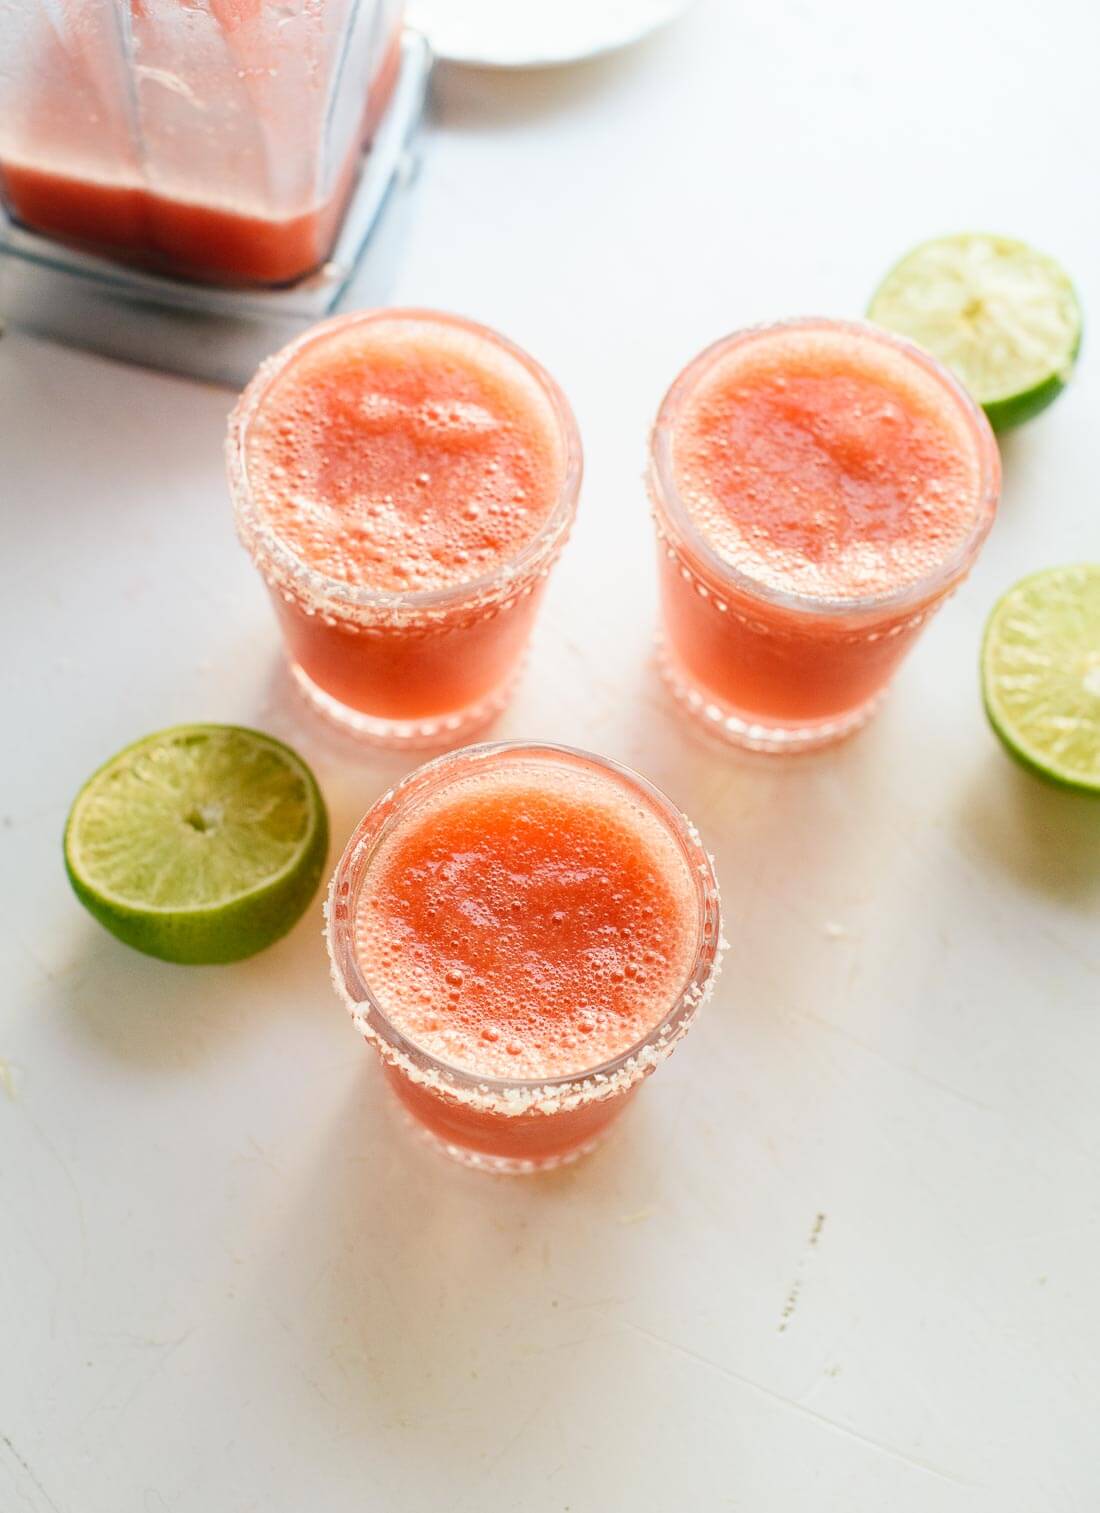 Cold strawberry margaritas are perfect for spring/summer parties! Ready in 10 minutes. cookieandkate.com